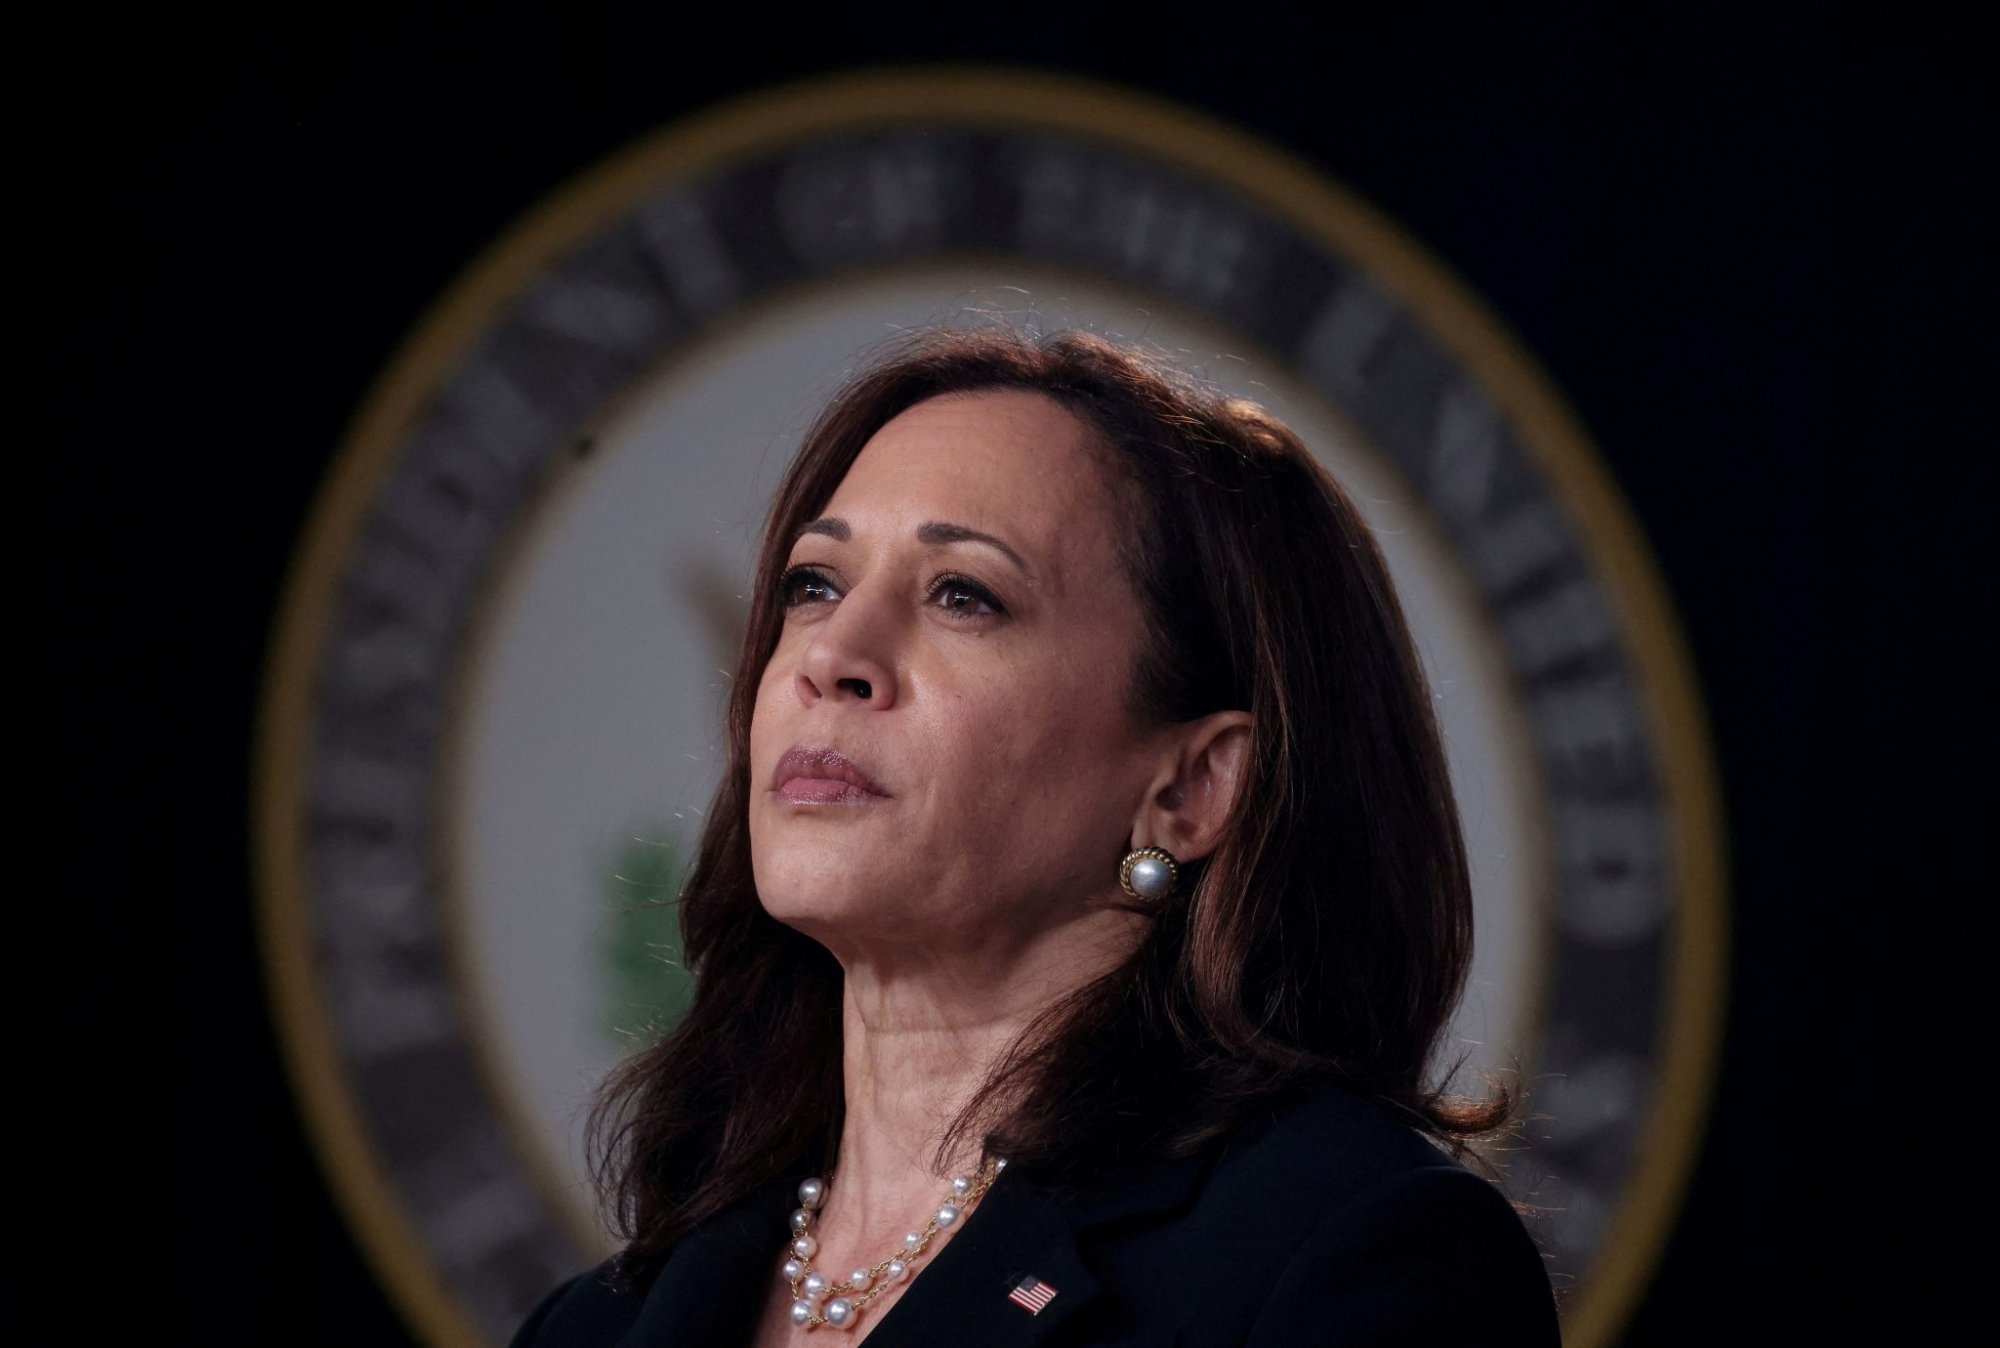 Harris Moves Fast to Win Support of Wealthy Democratic Donors